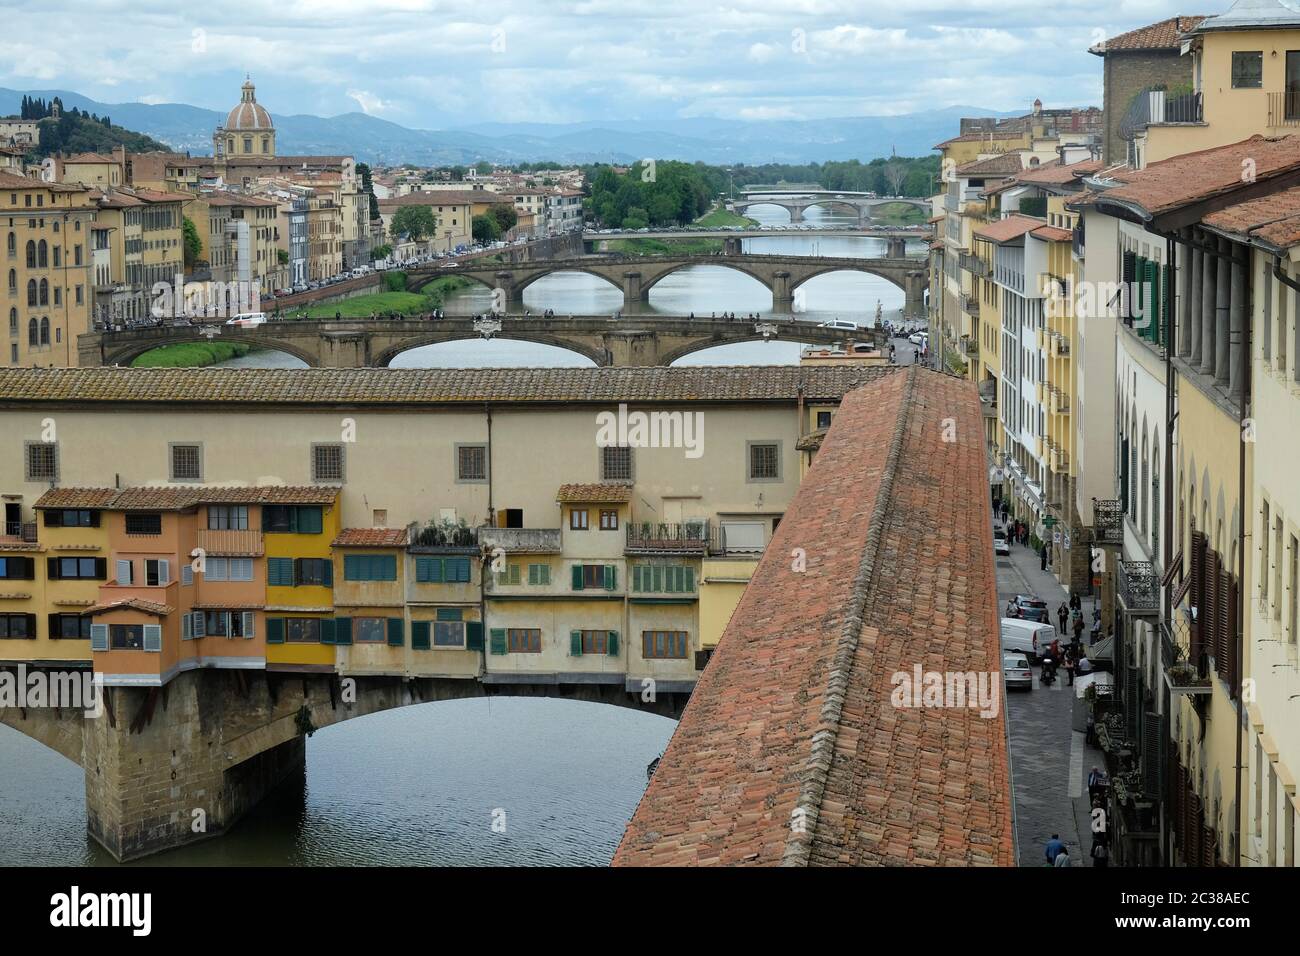 Ponte Vecchio on the River Arno, Florence, seen from the Uffizi. Stock Photo